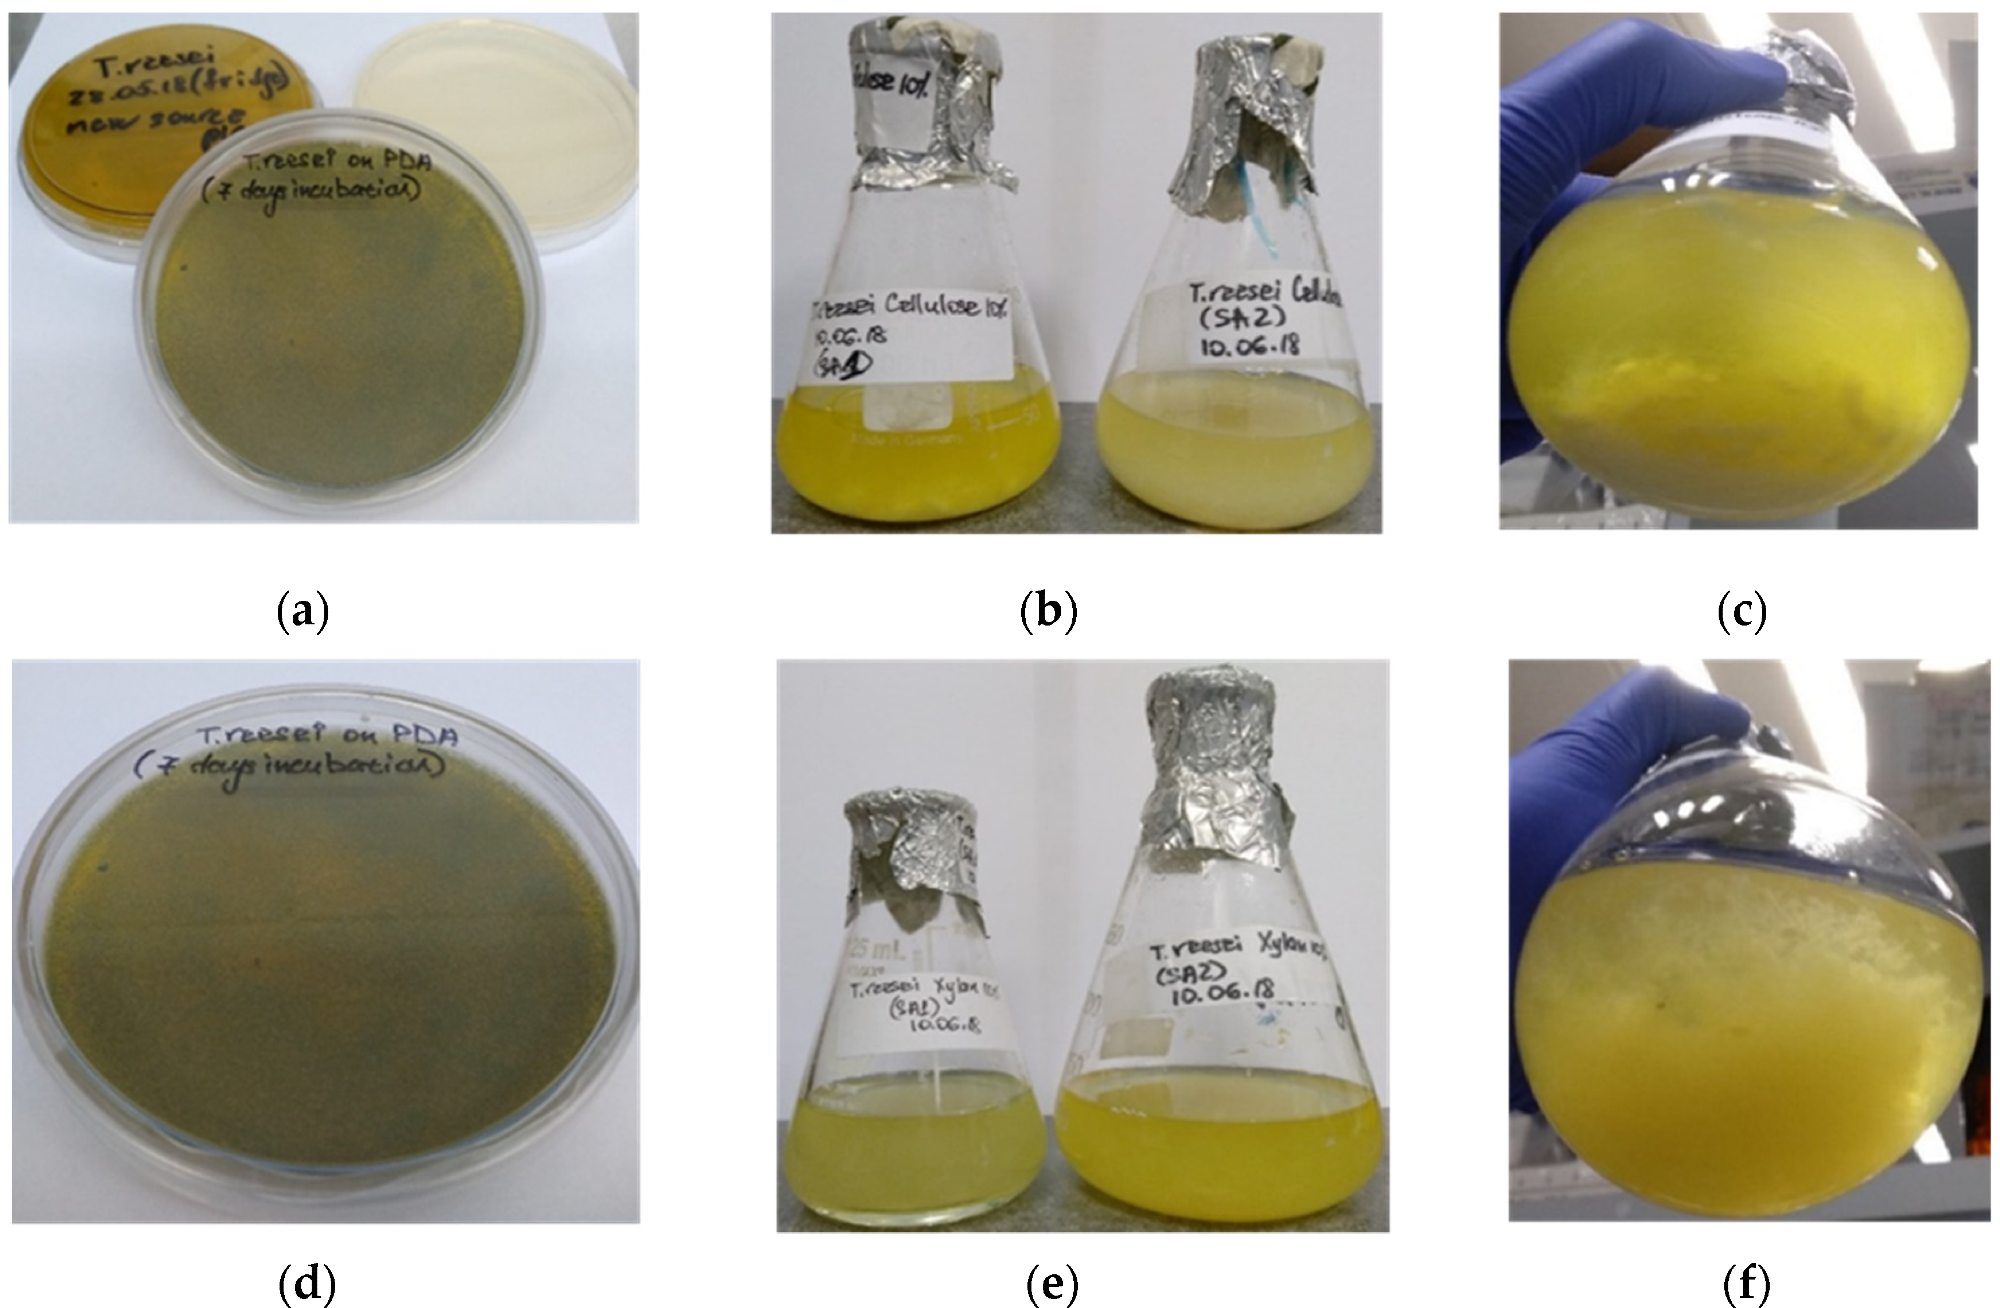 Shake-flask cultivation of T. reesei on cellulose-based (a–c) and xylan-based (d–f) culture media. (a,d)—PDA plates with fungal mycelium after 7 days incubation at 30 °C; (b,c)—biomass production of T. reesei cultured in the growth medium with cellulose added as carbon source, after 14 days incubation at 30 °C; (e,f)—biomass production of T. reesei cultured in the growth medium with xylan added as carbon source system, after 14 days incubation at 30 °C.